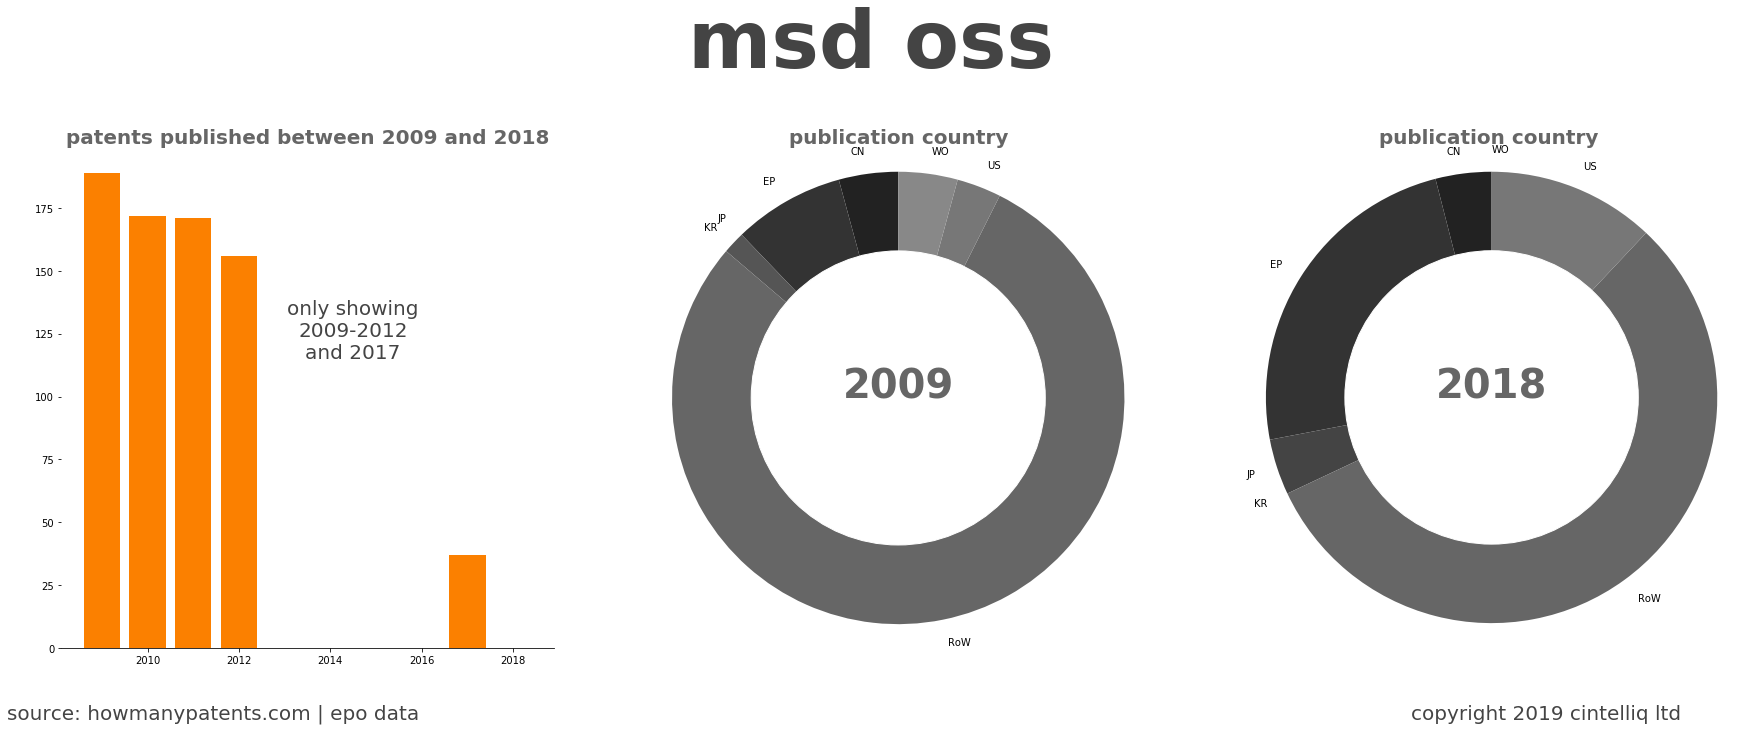 summary of patents for Msd Oss